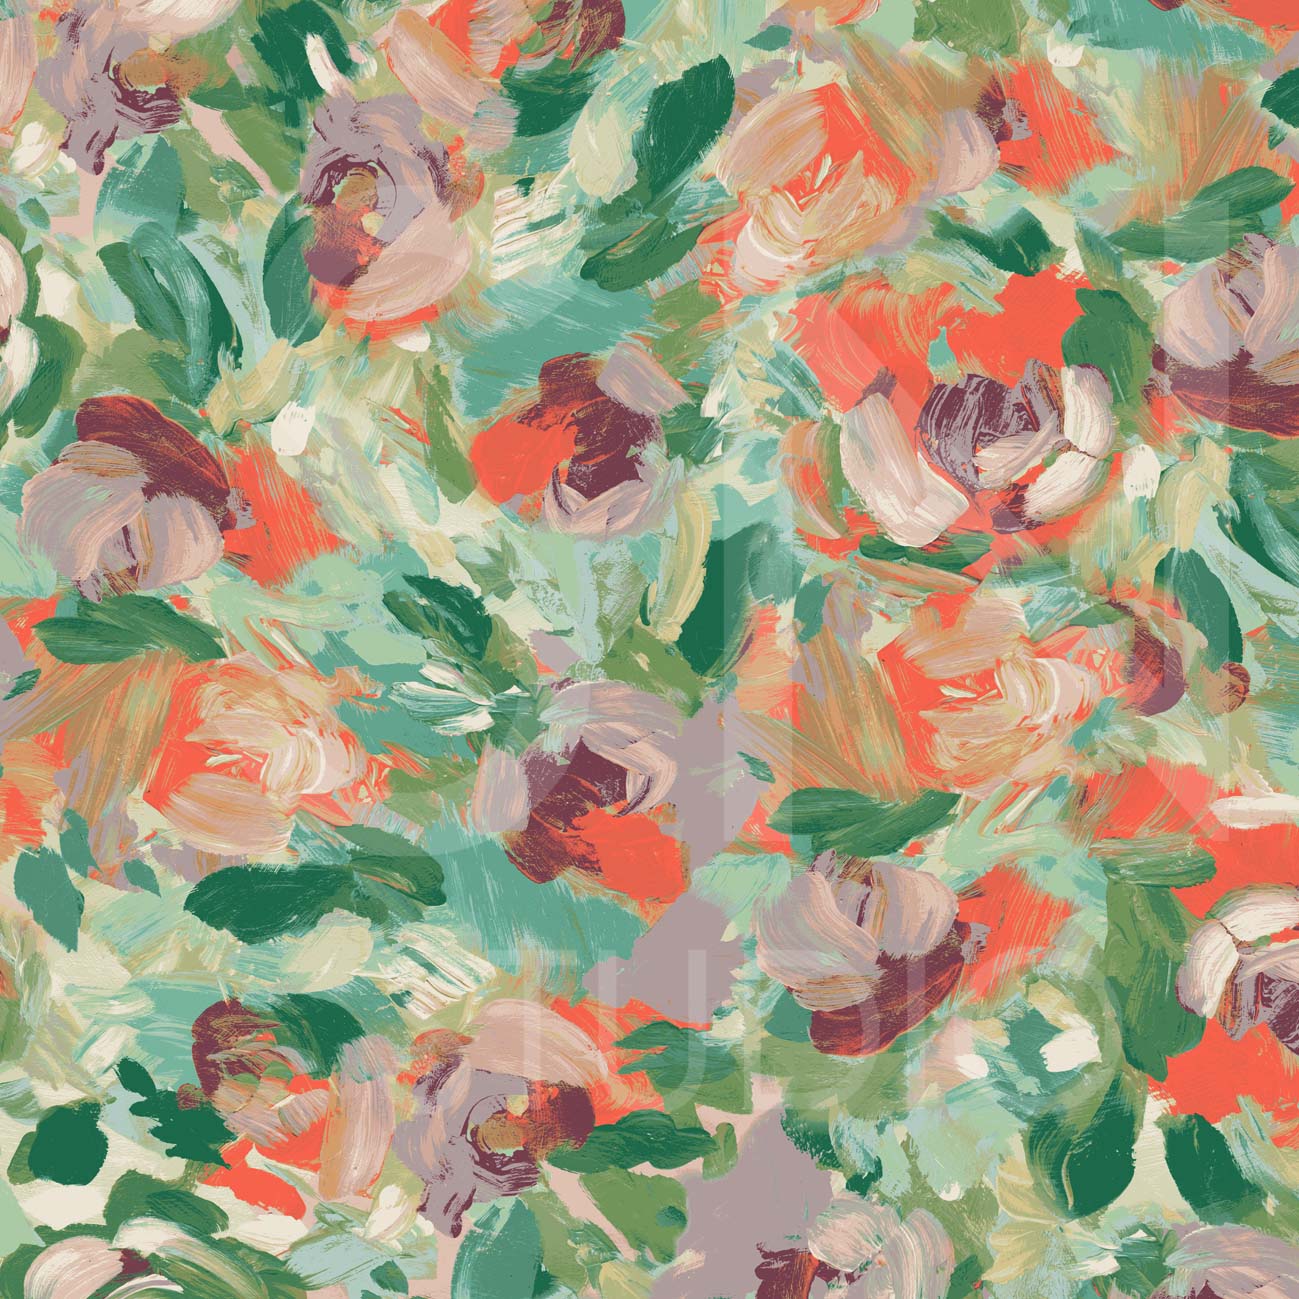 This pattern features bold and cheerful abstract roses, creating a dynamic and visually striking surface pattern design.